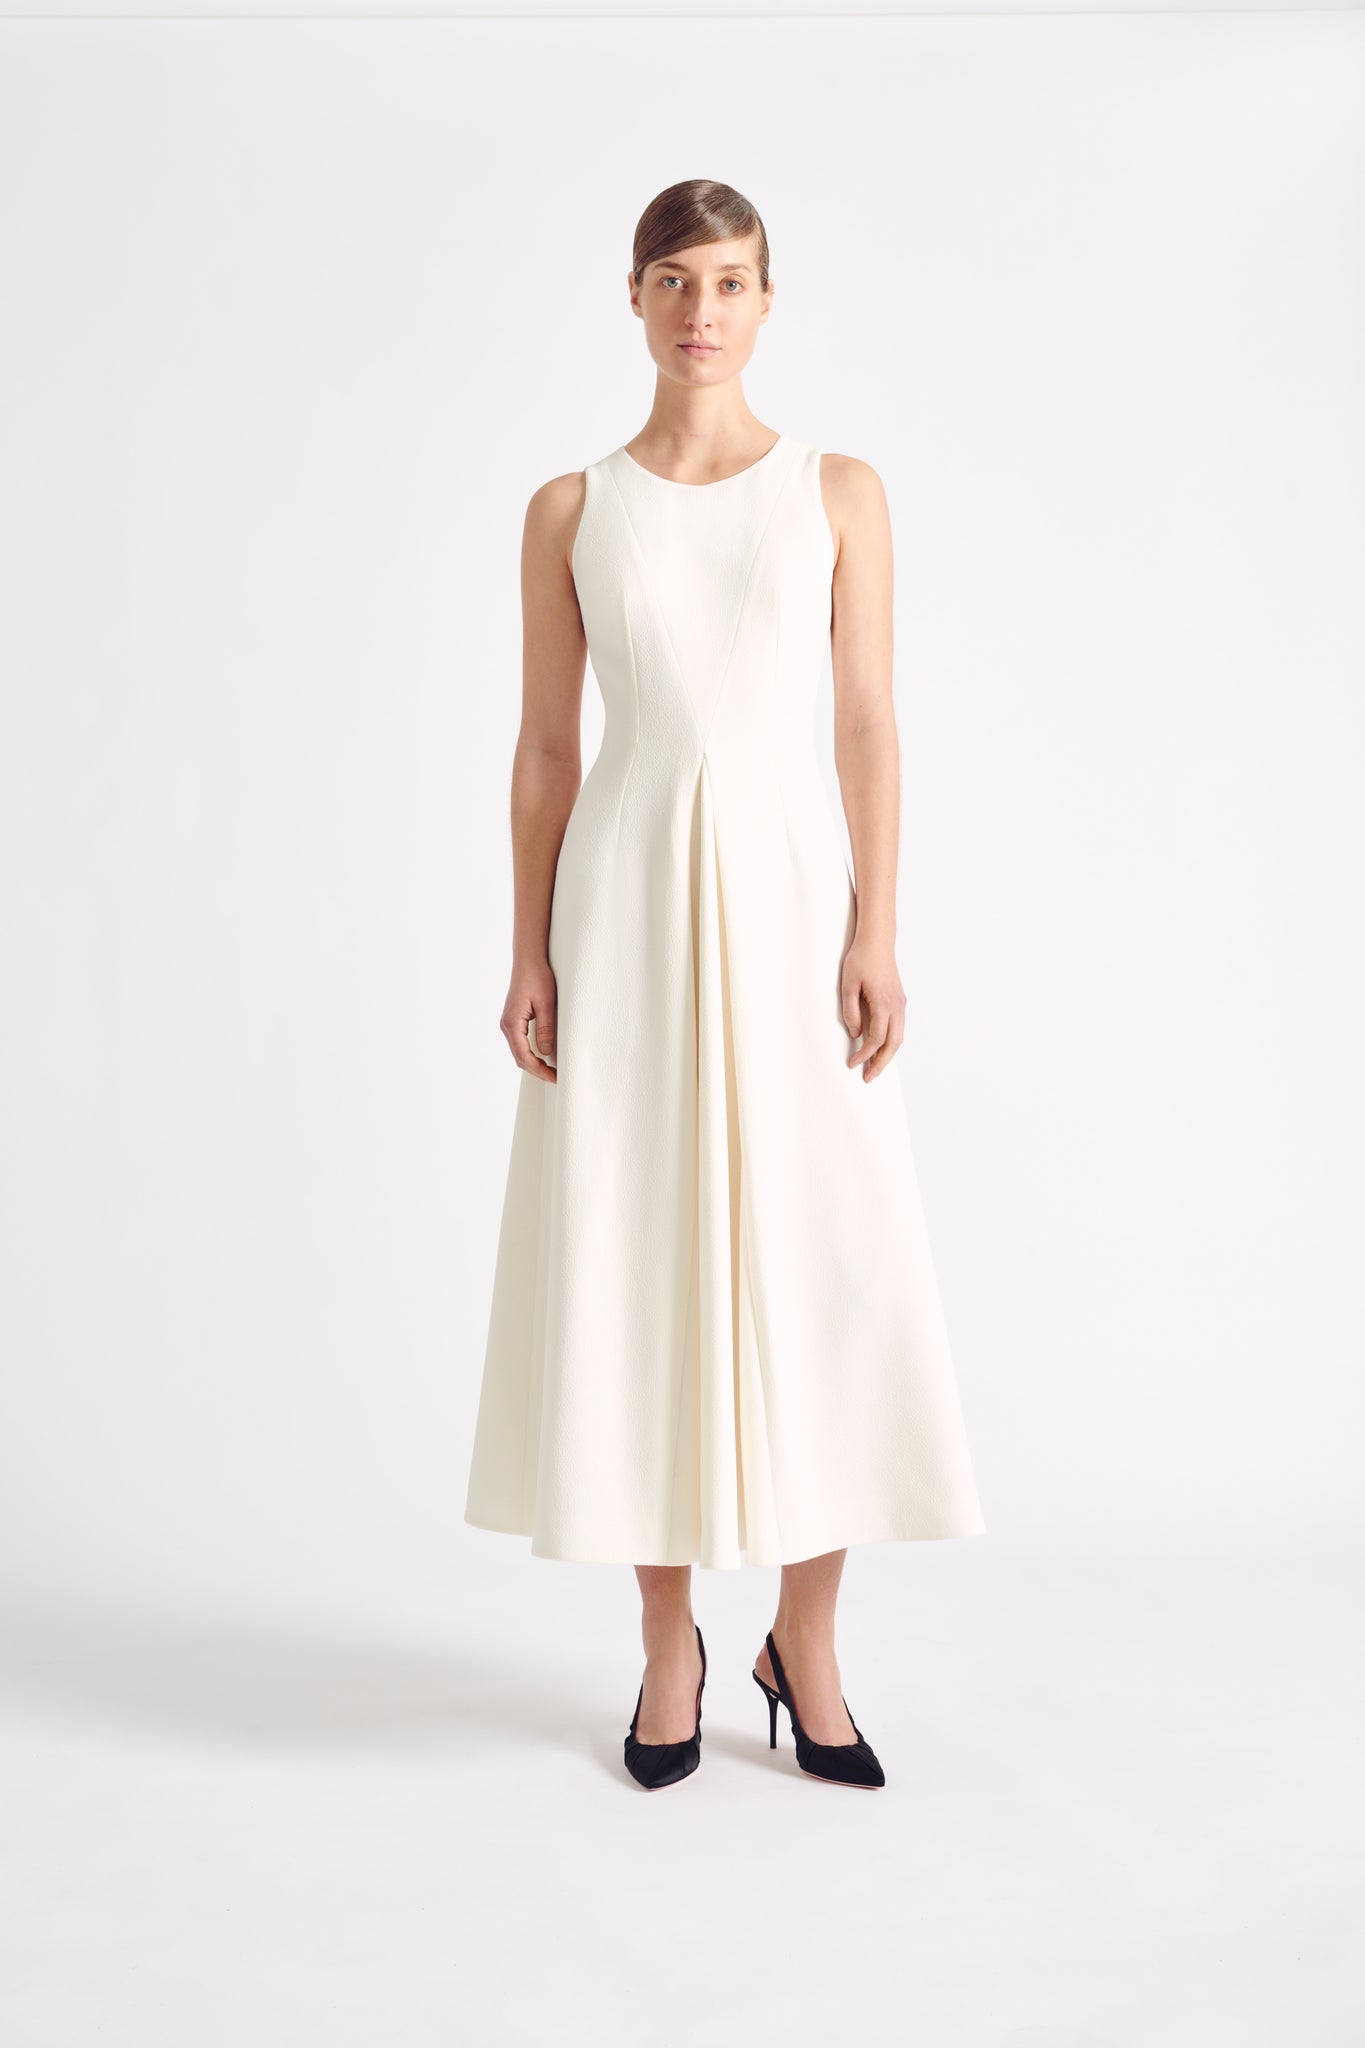 Milly Dress | Ivory Fit and Flare Dress in Double Crepe | Emilia Wickstead